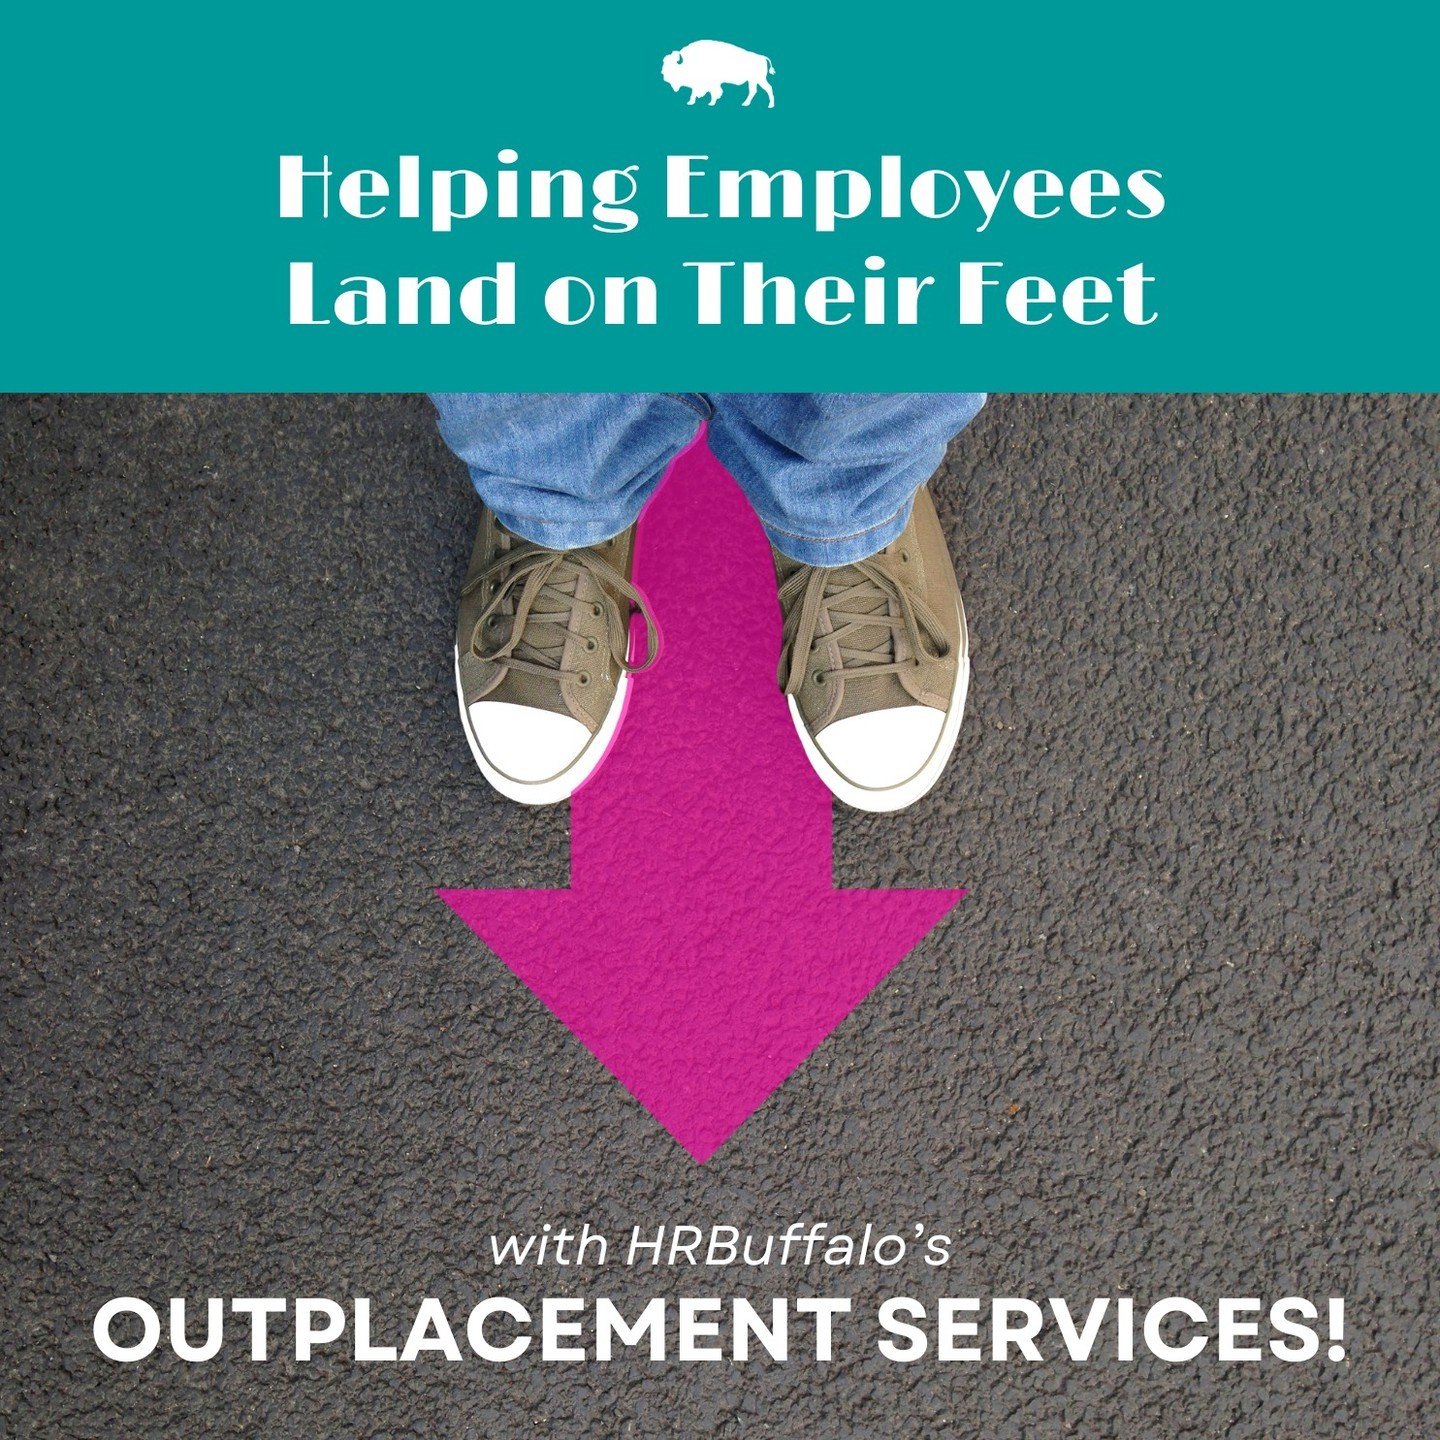 We understand the challenges of letting go of valued team members. @HRBuffalo's Outplacement Services provide a smooth transition for departing employees, with services like resume review, interview prep, career coaching and more. 

Explore our compr